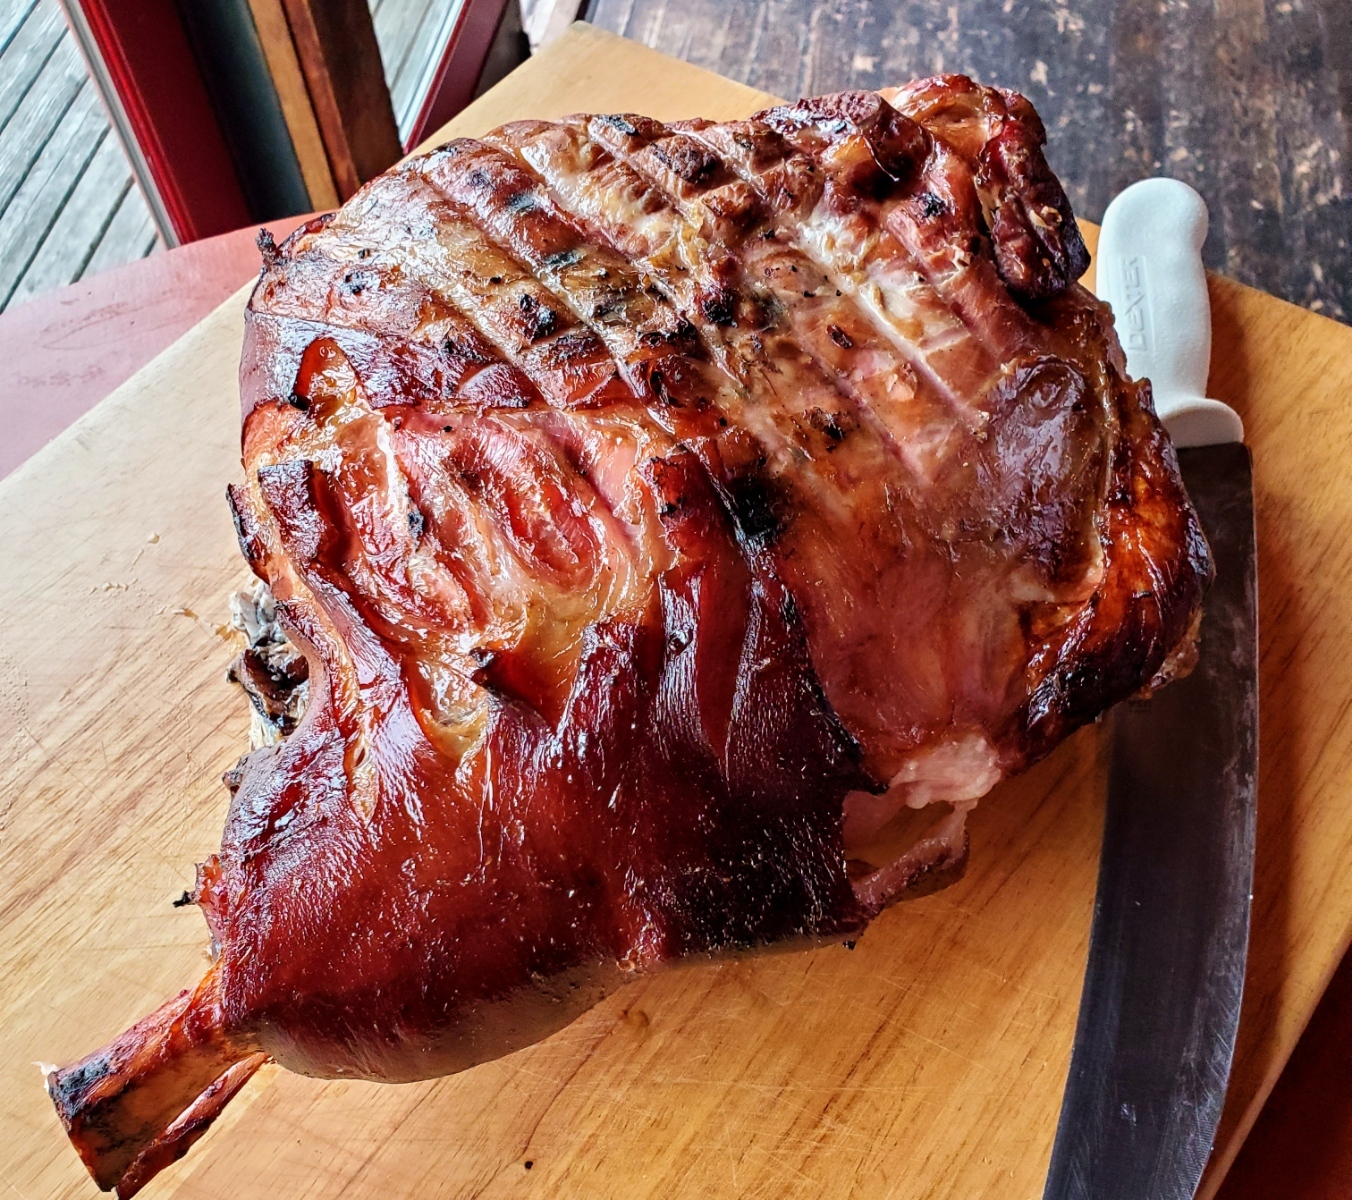 Townline BBQ is smoking hams to take home for the holidays.